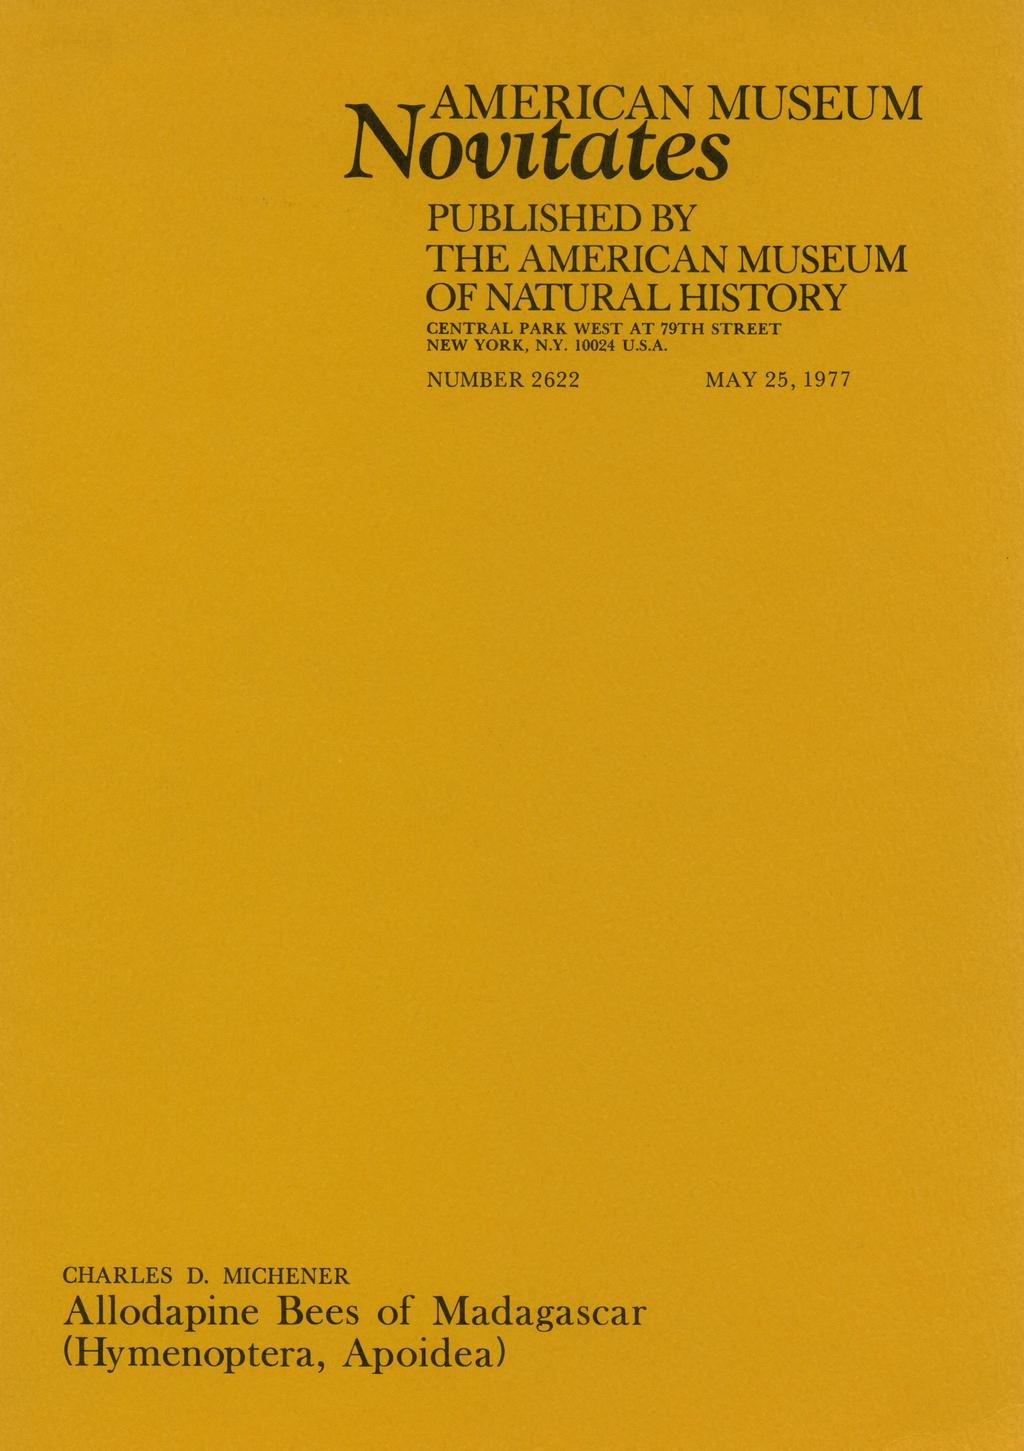 AMERICAN MUSEUM Novlttates PUBLISHED BY THE AMERICAN MUSEUM OF NATURAL HISTORY CENTRAL PARK WEST AT 79TH STREET NEW